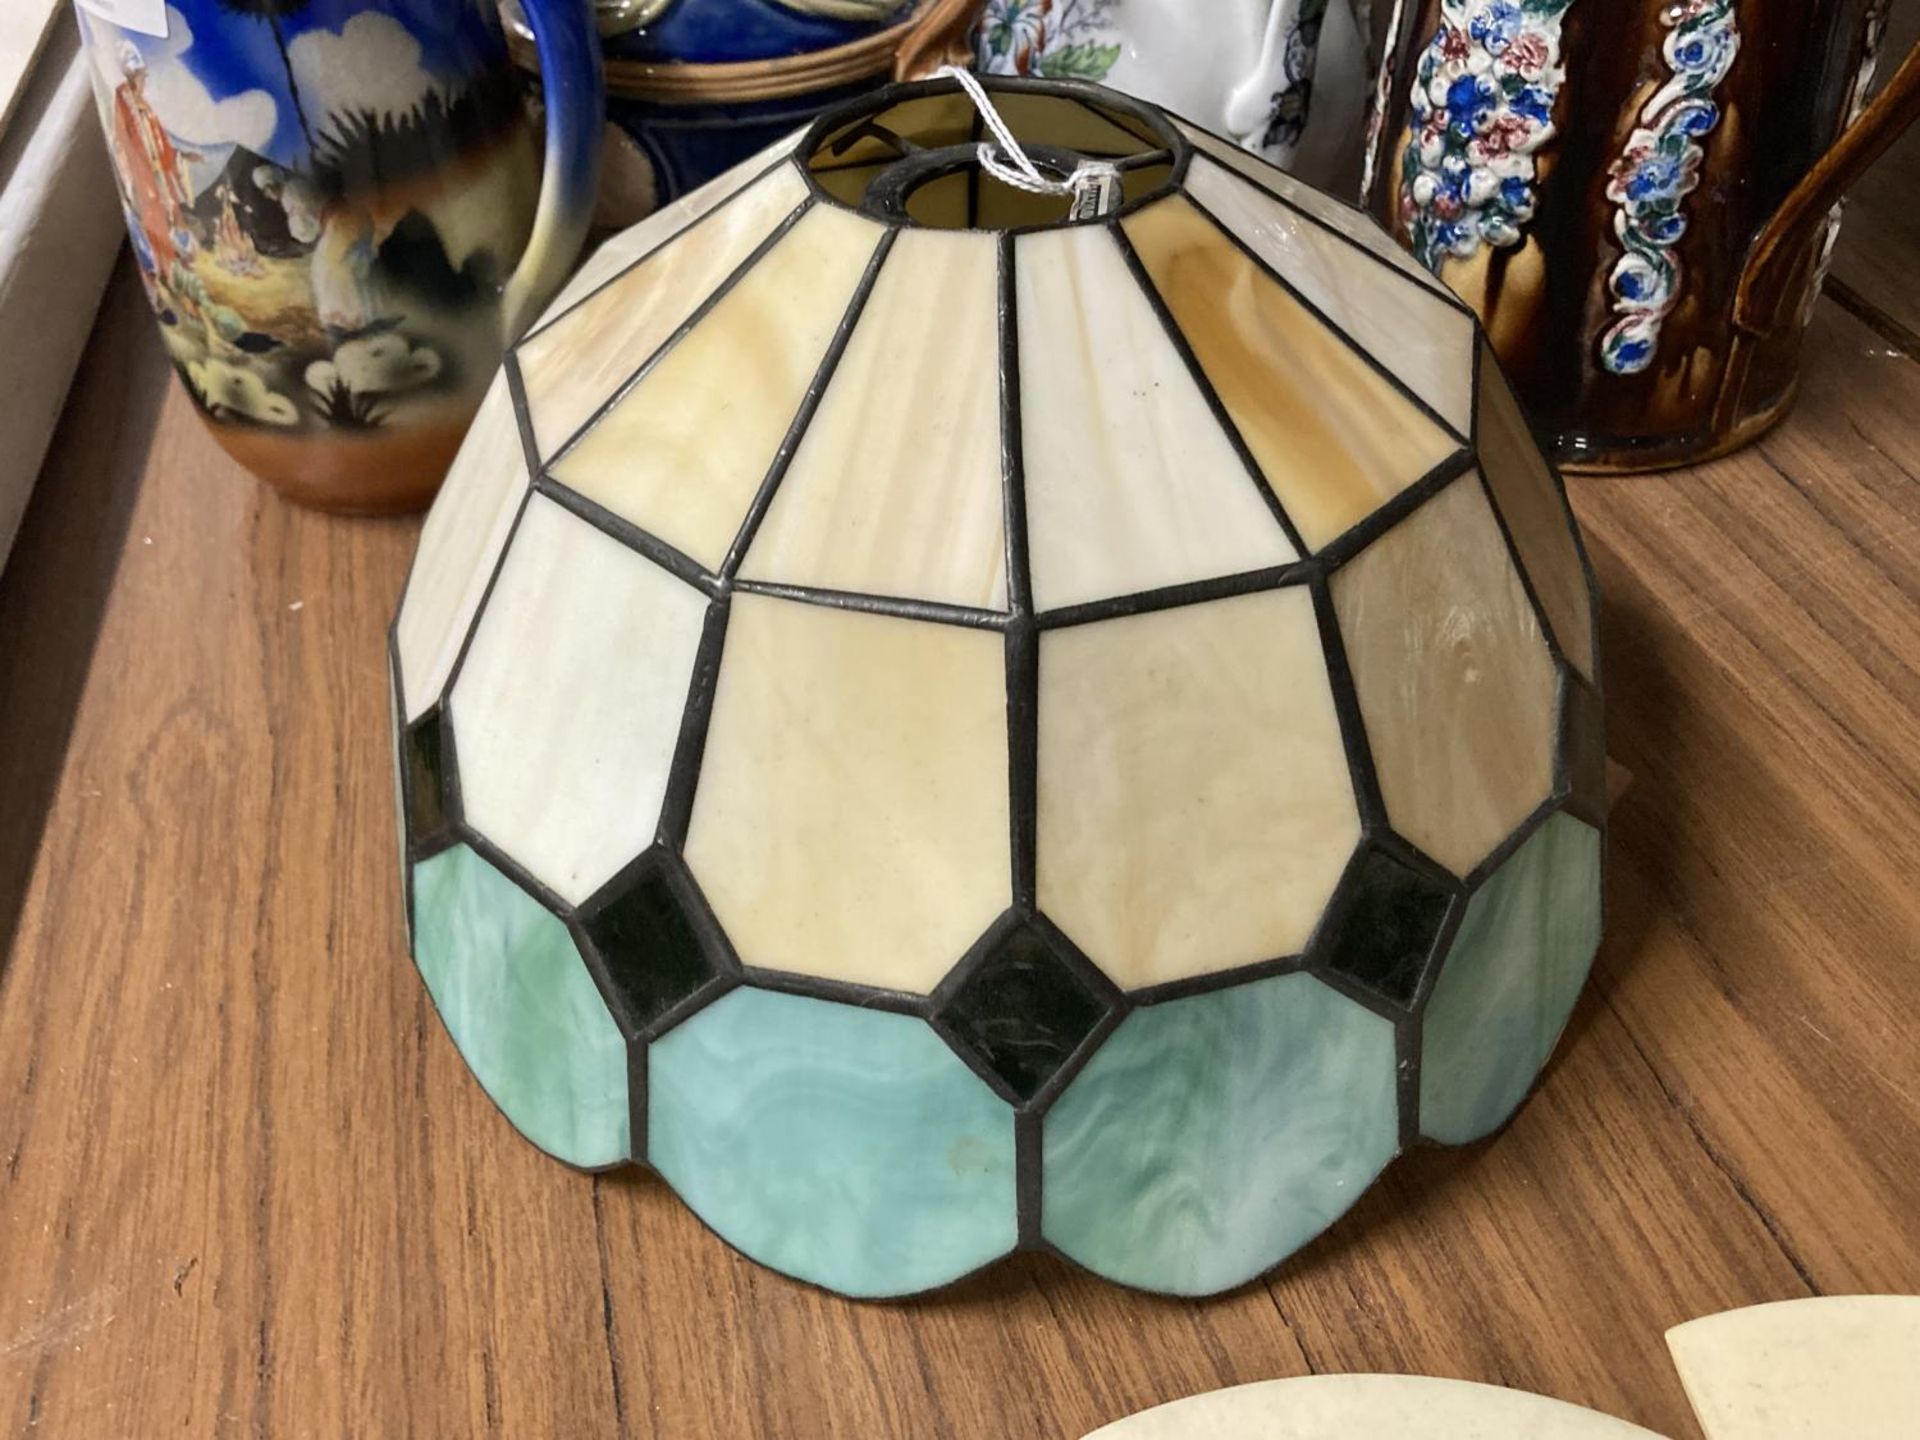 A TIFFANY STYLE CEILING LIGHT SHADE DIAMETER 25.5CM - Image 2 of 2